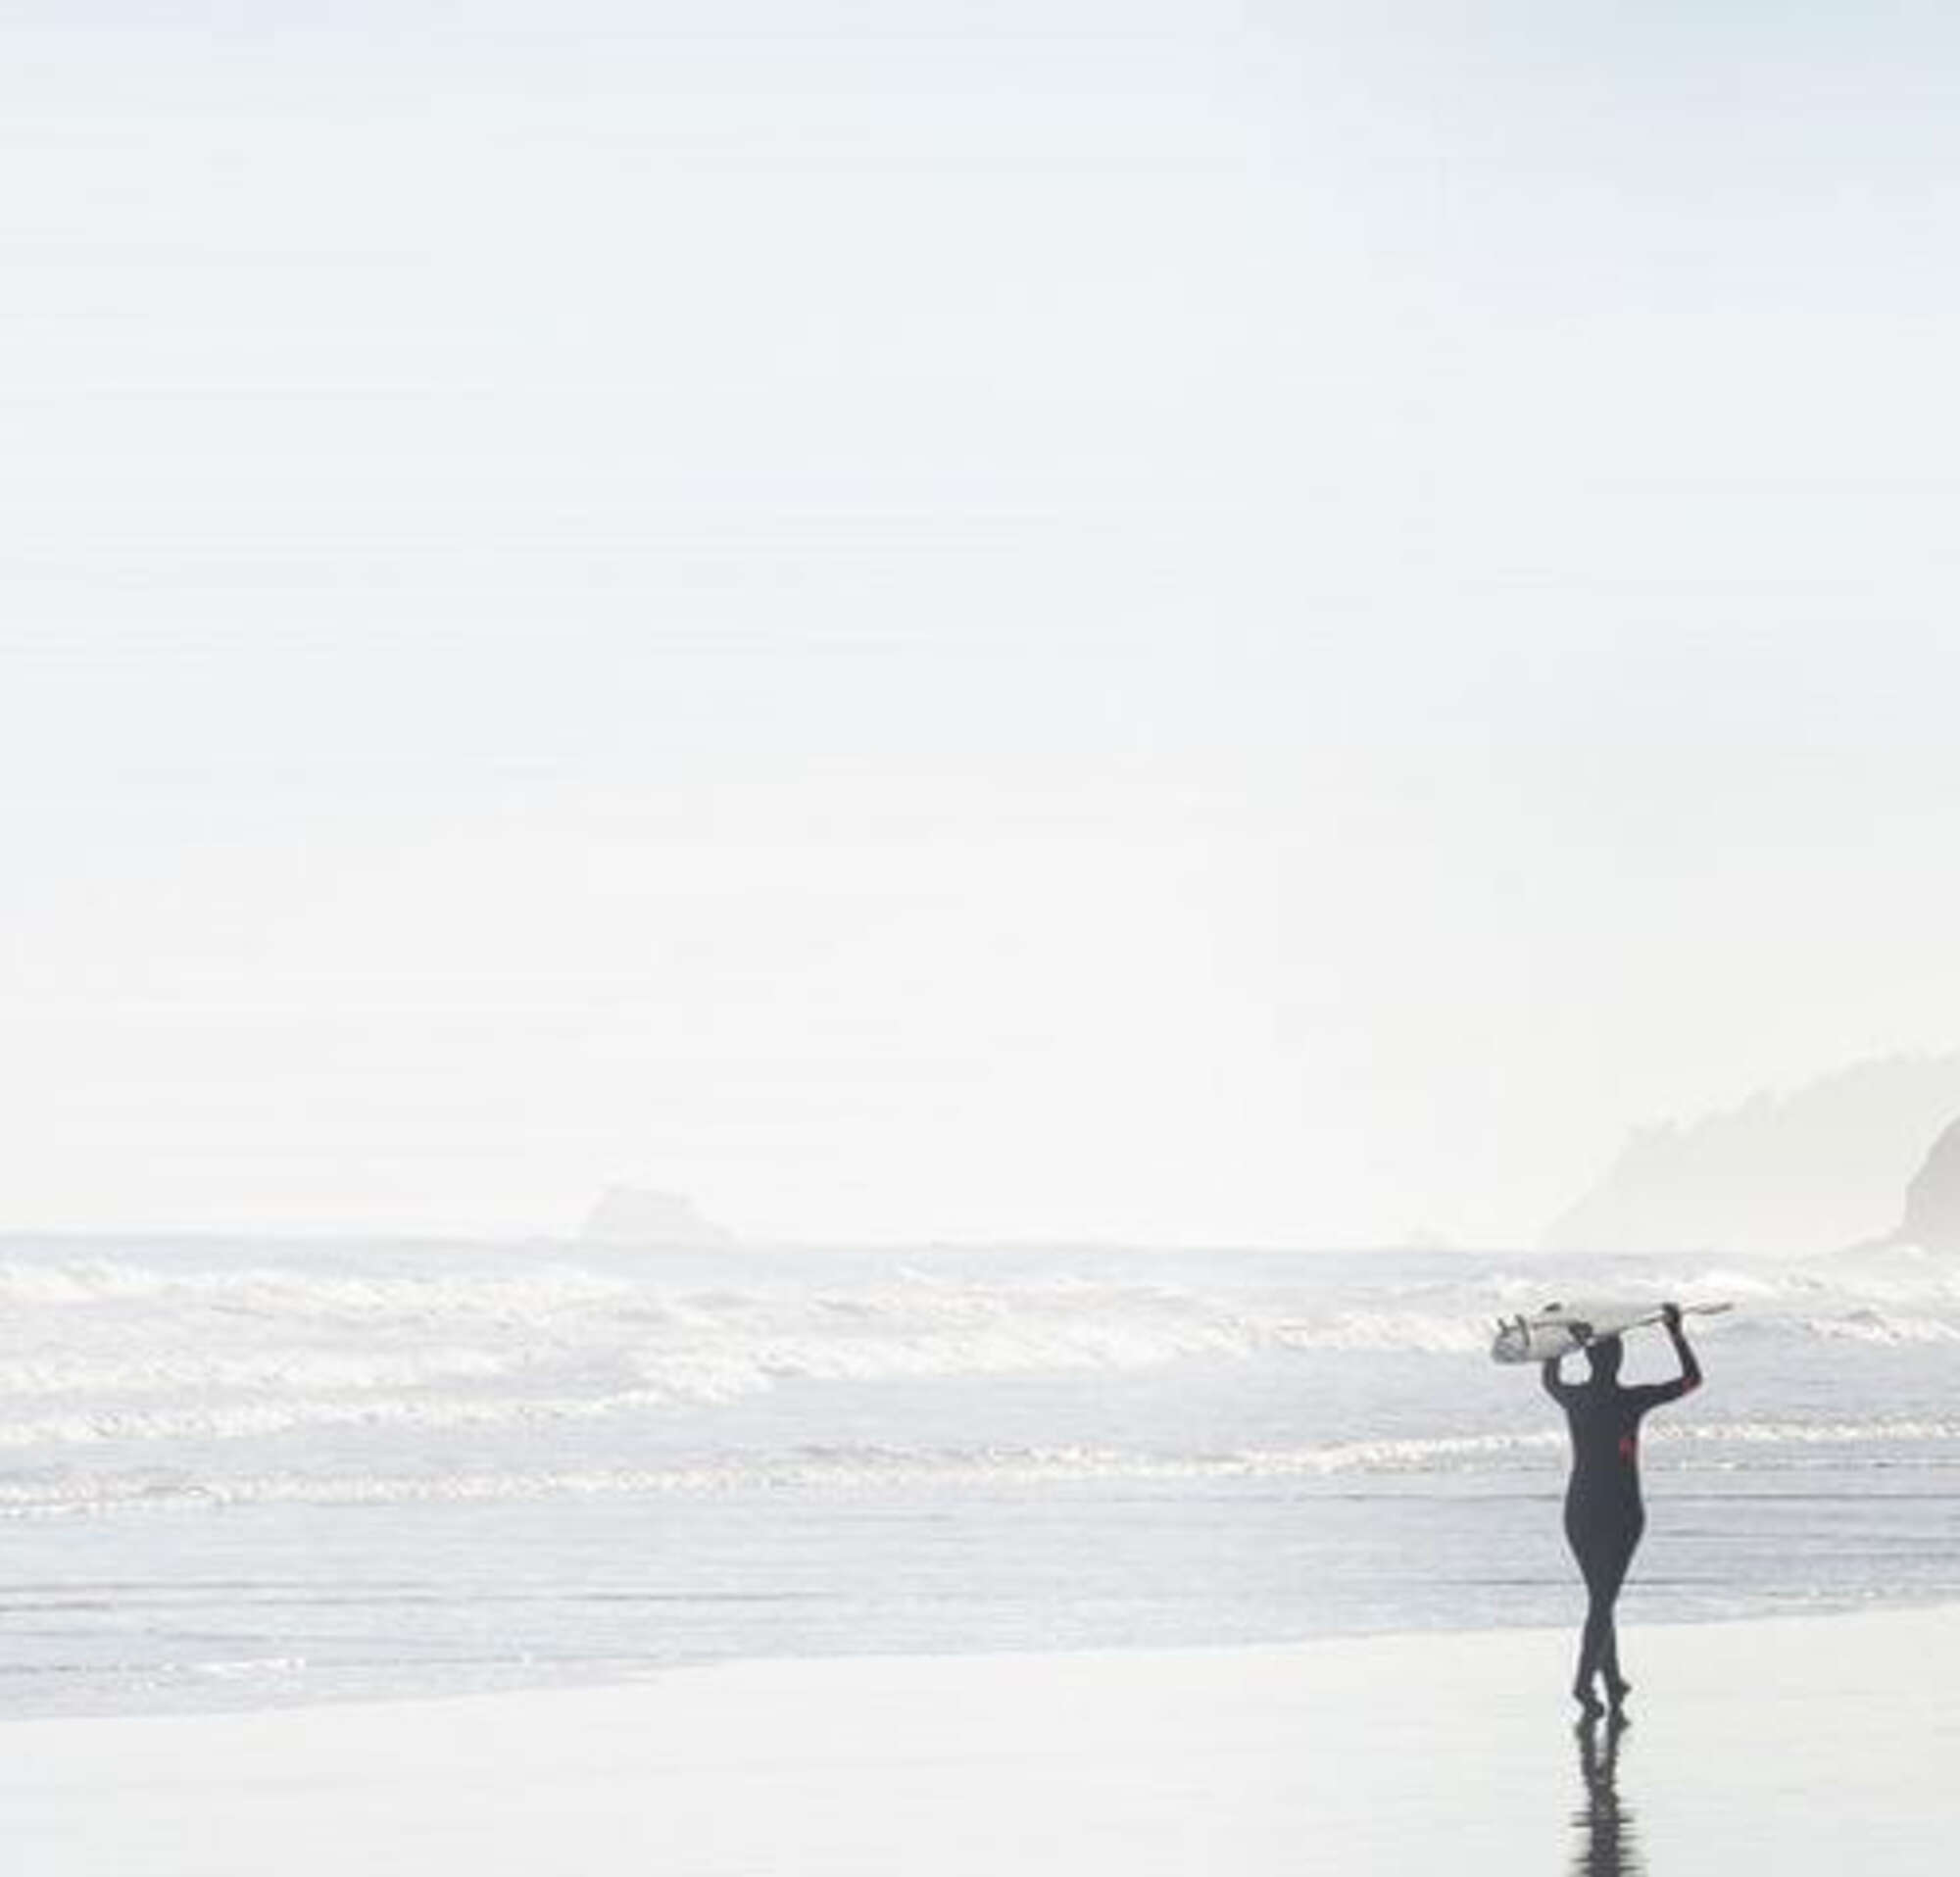 Two surfers walking together on a misty morning along a beach, carrying their surfboards above their heads.